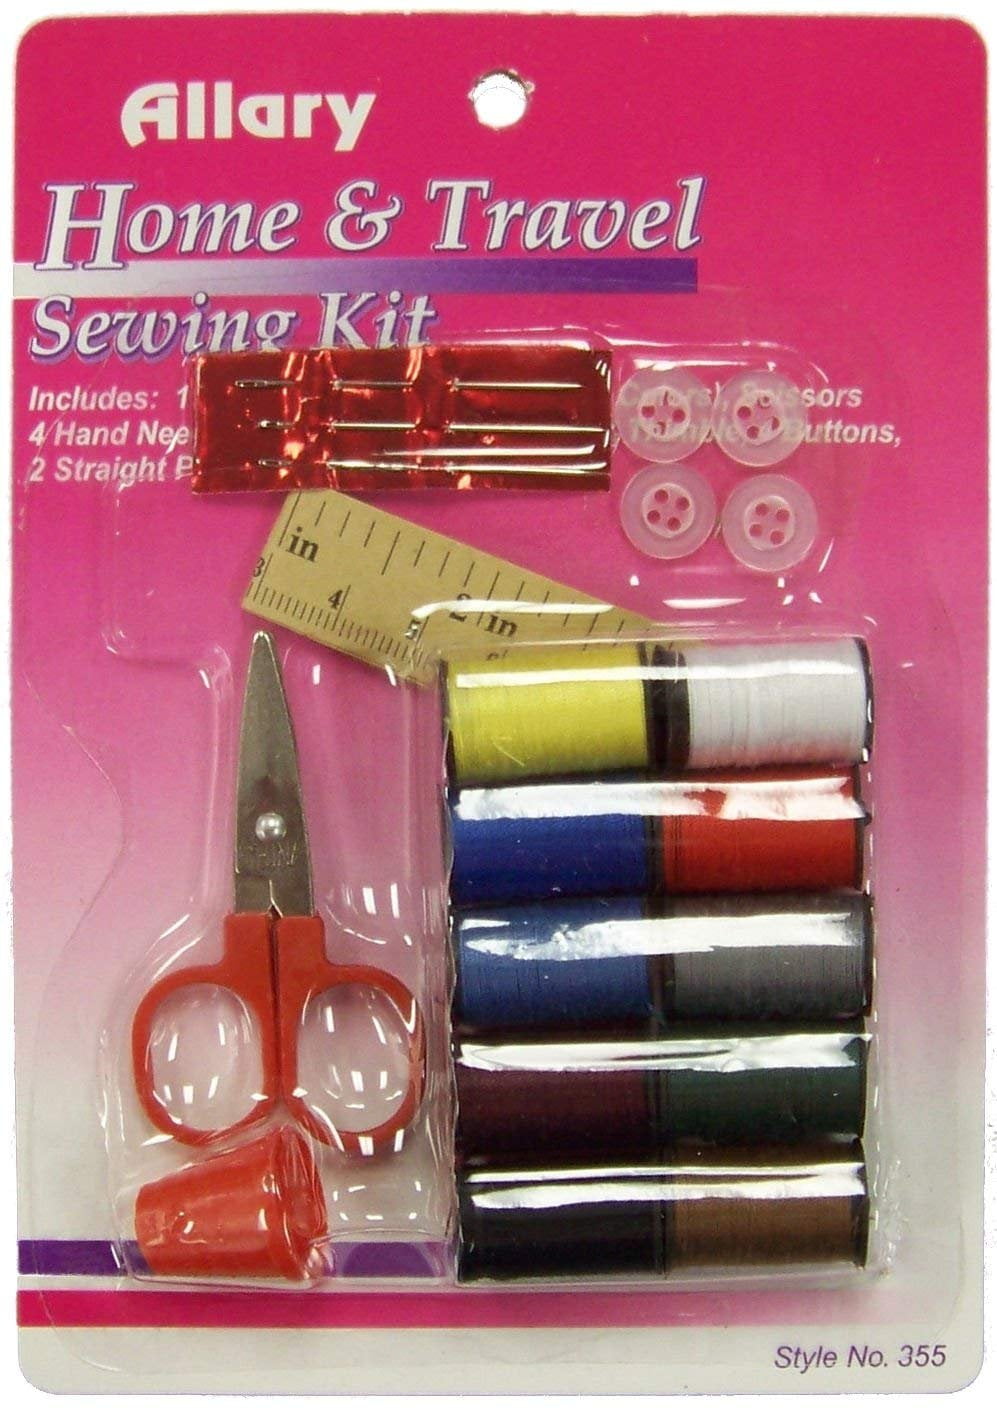 Allary Home & Travel Sewing Kit - 1 ct pkg